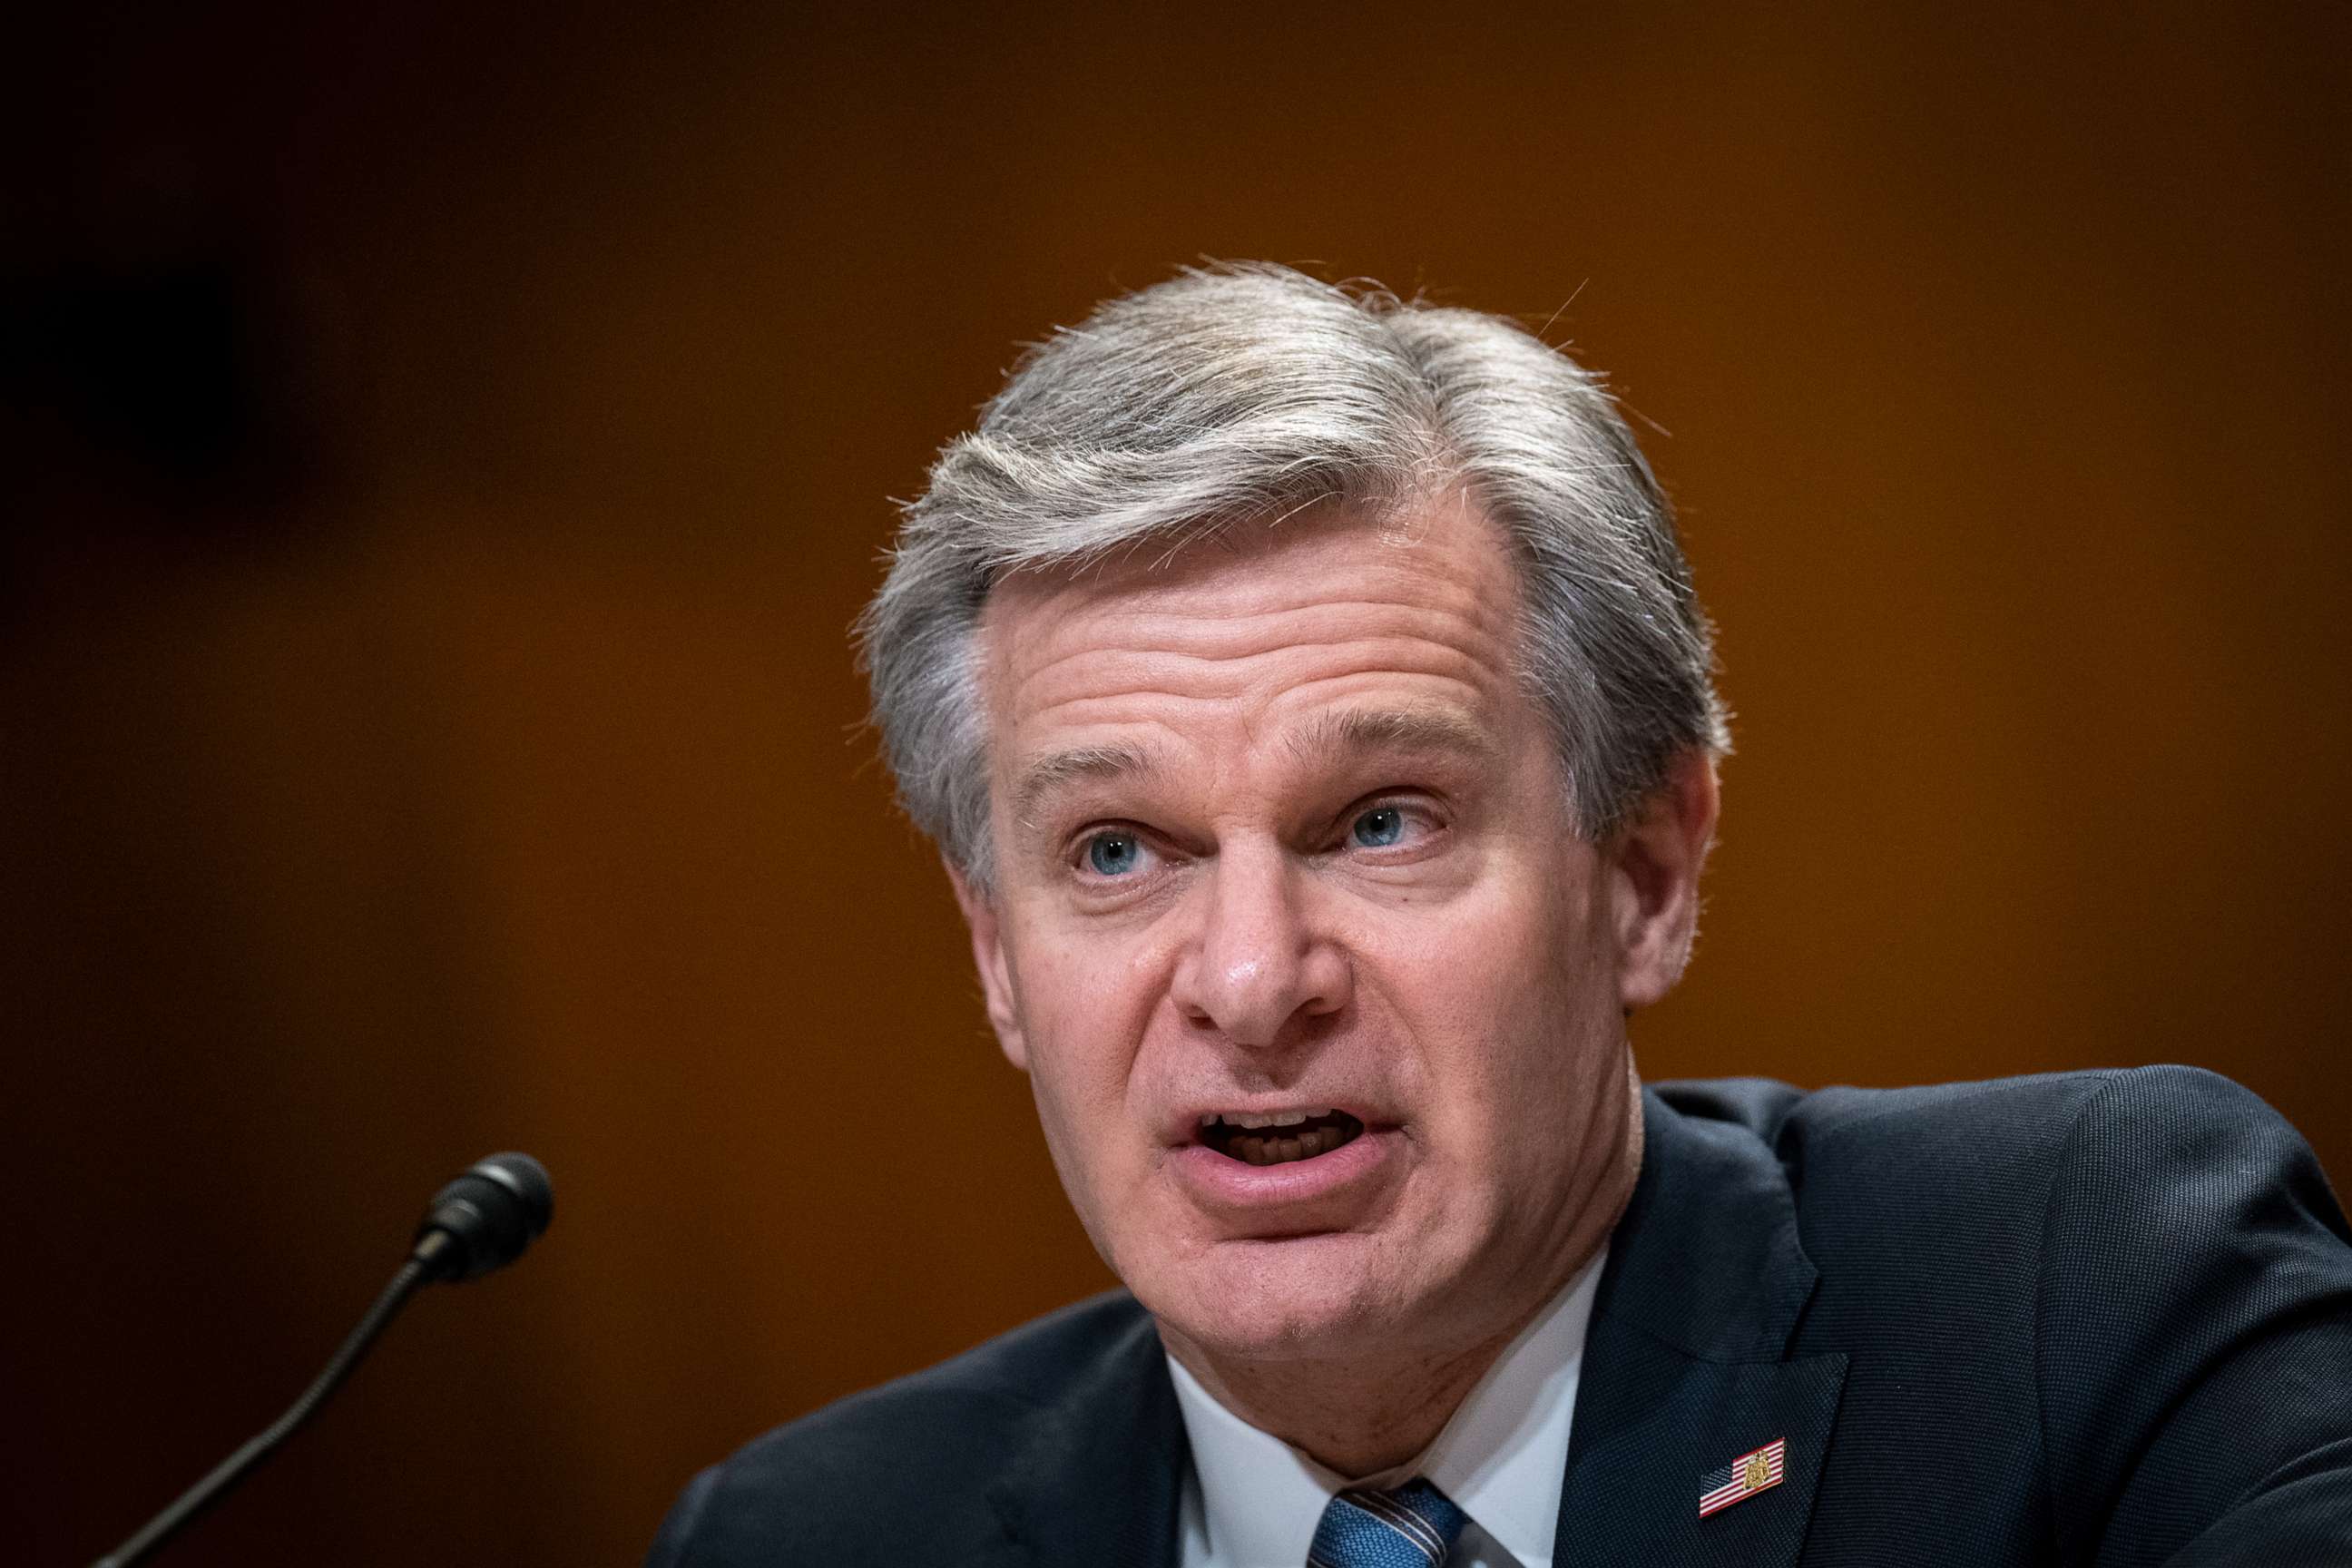 PHOTO: FBI Director Christopher Wray testifies during a Senate Appropriations Subcommittee on Commerce, Justice, Science, and Related Agencies hearing on Capitol Hill, May 10, 2023 in Washington, DC.